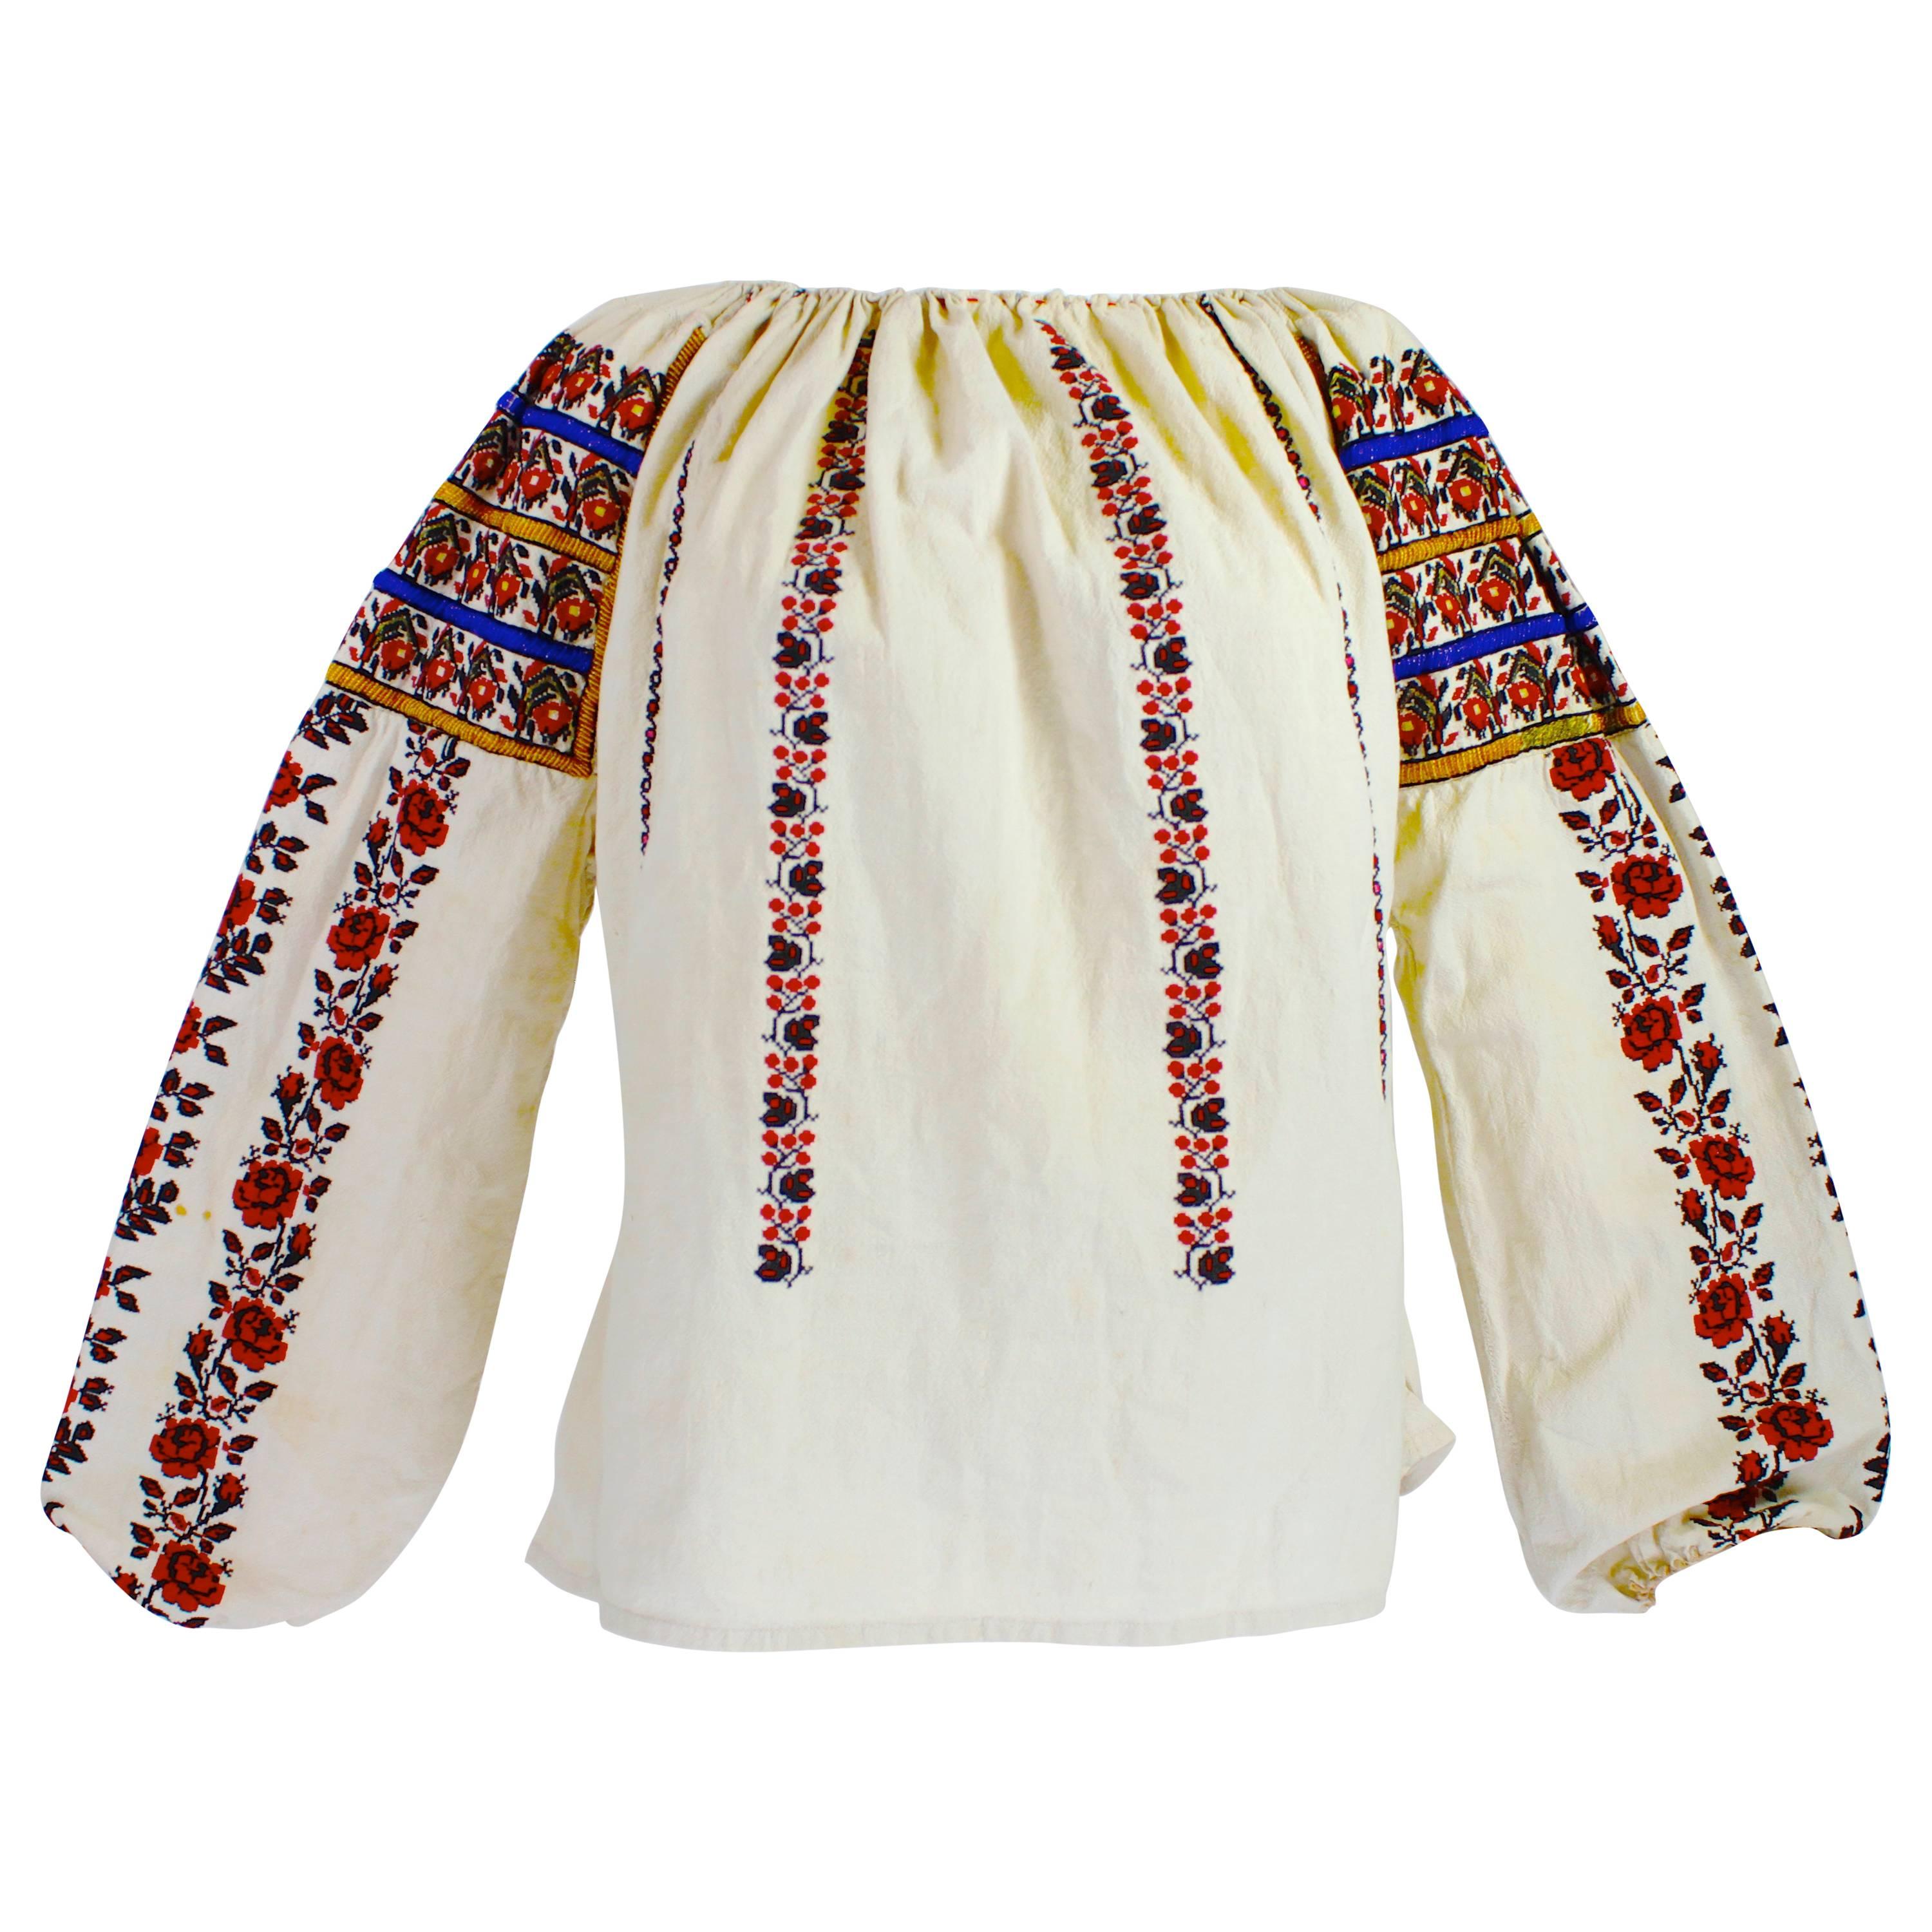 1930s Eastern European Geometric Floral Beaded and Embroidered Peasant Blouse